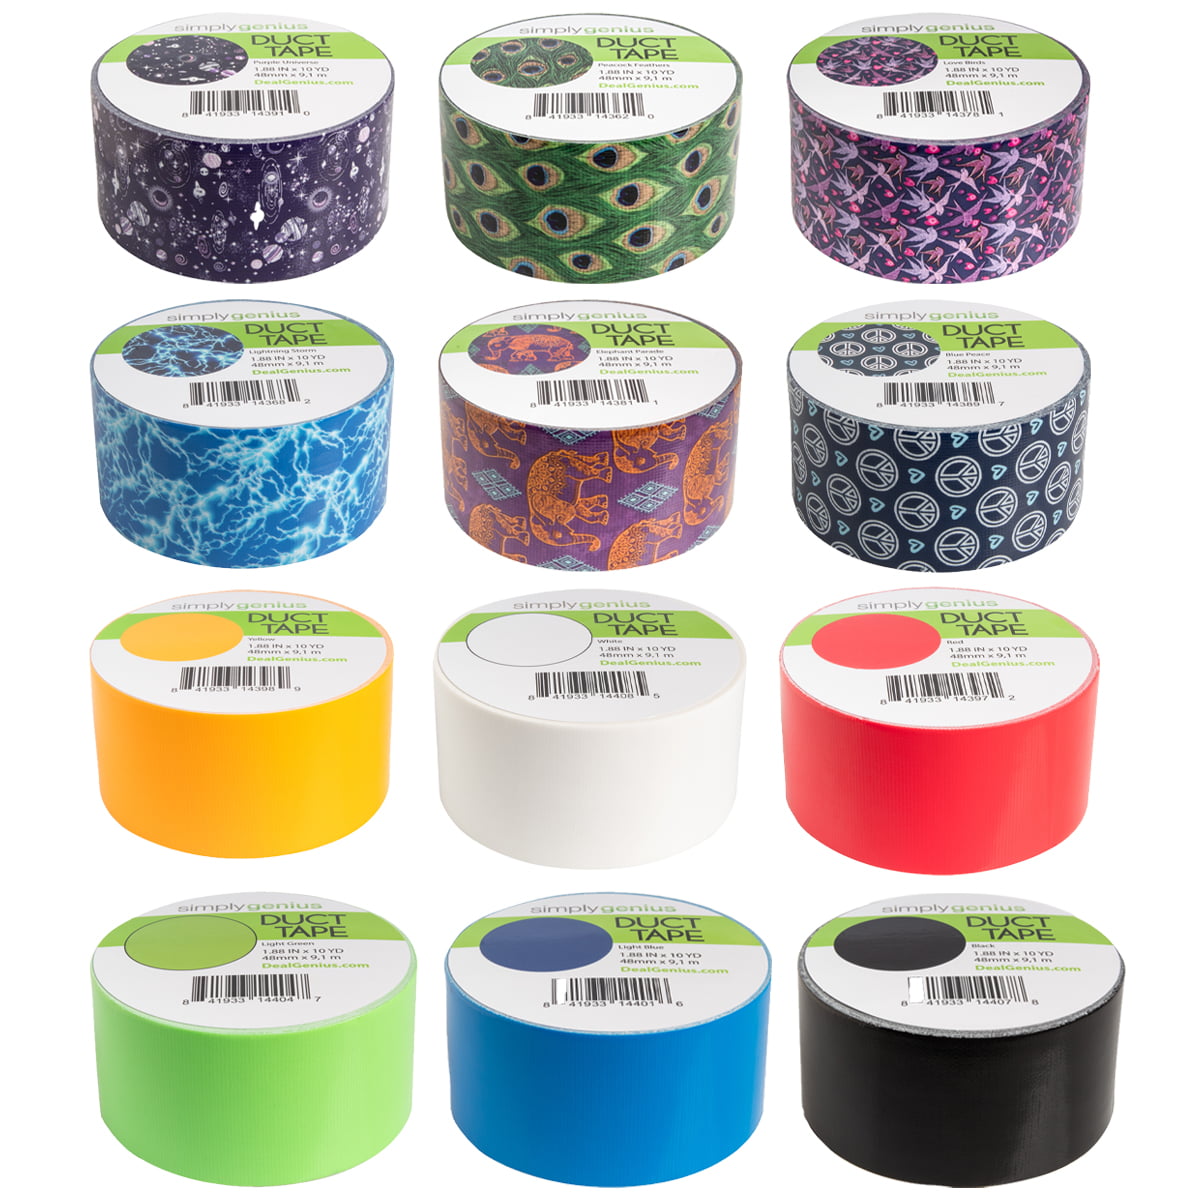 Simply Genius (12 Pack) Patterned Colored Duct Tape Variety Pack